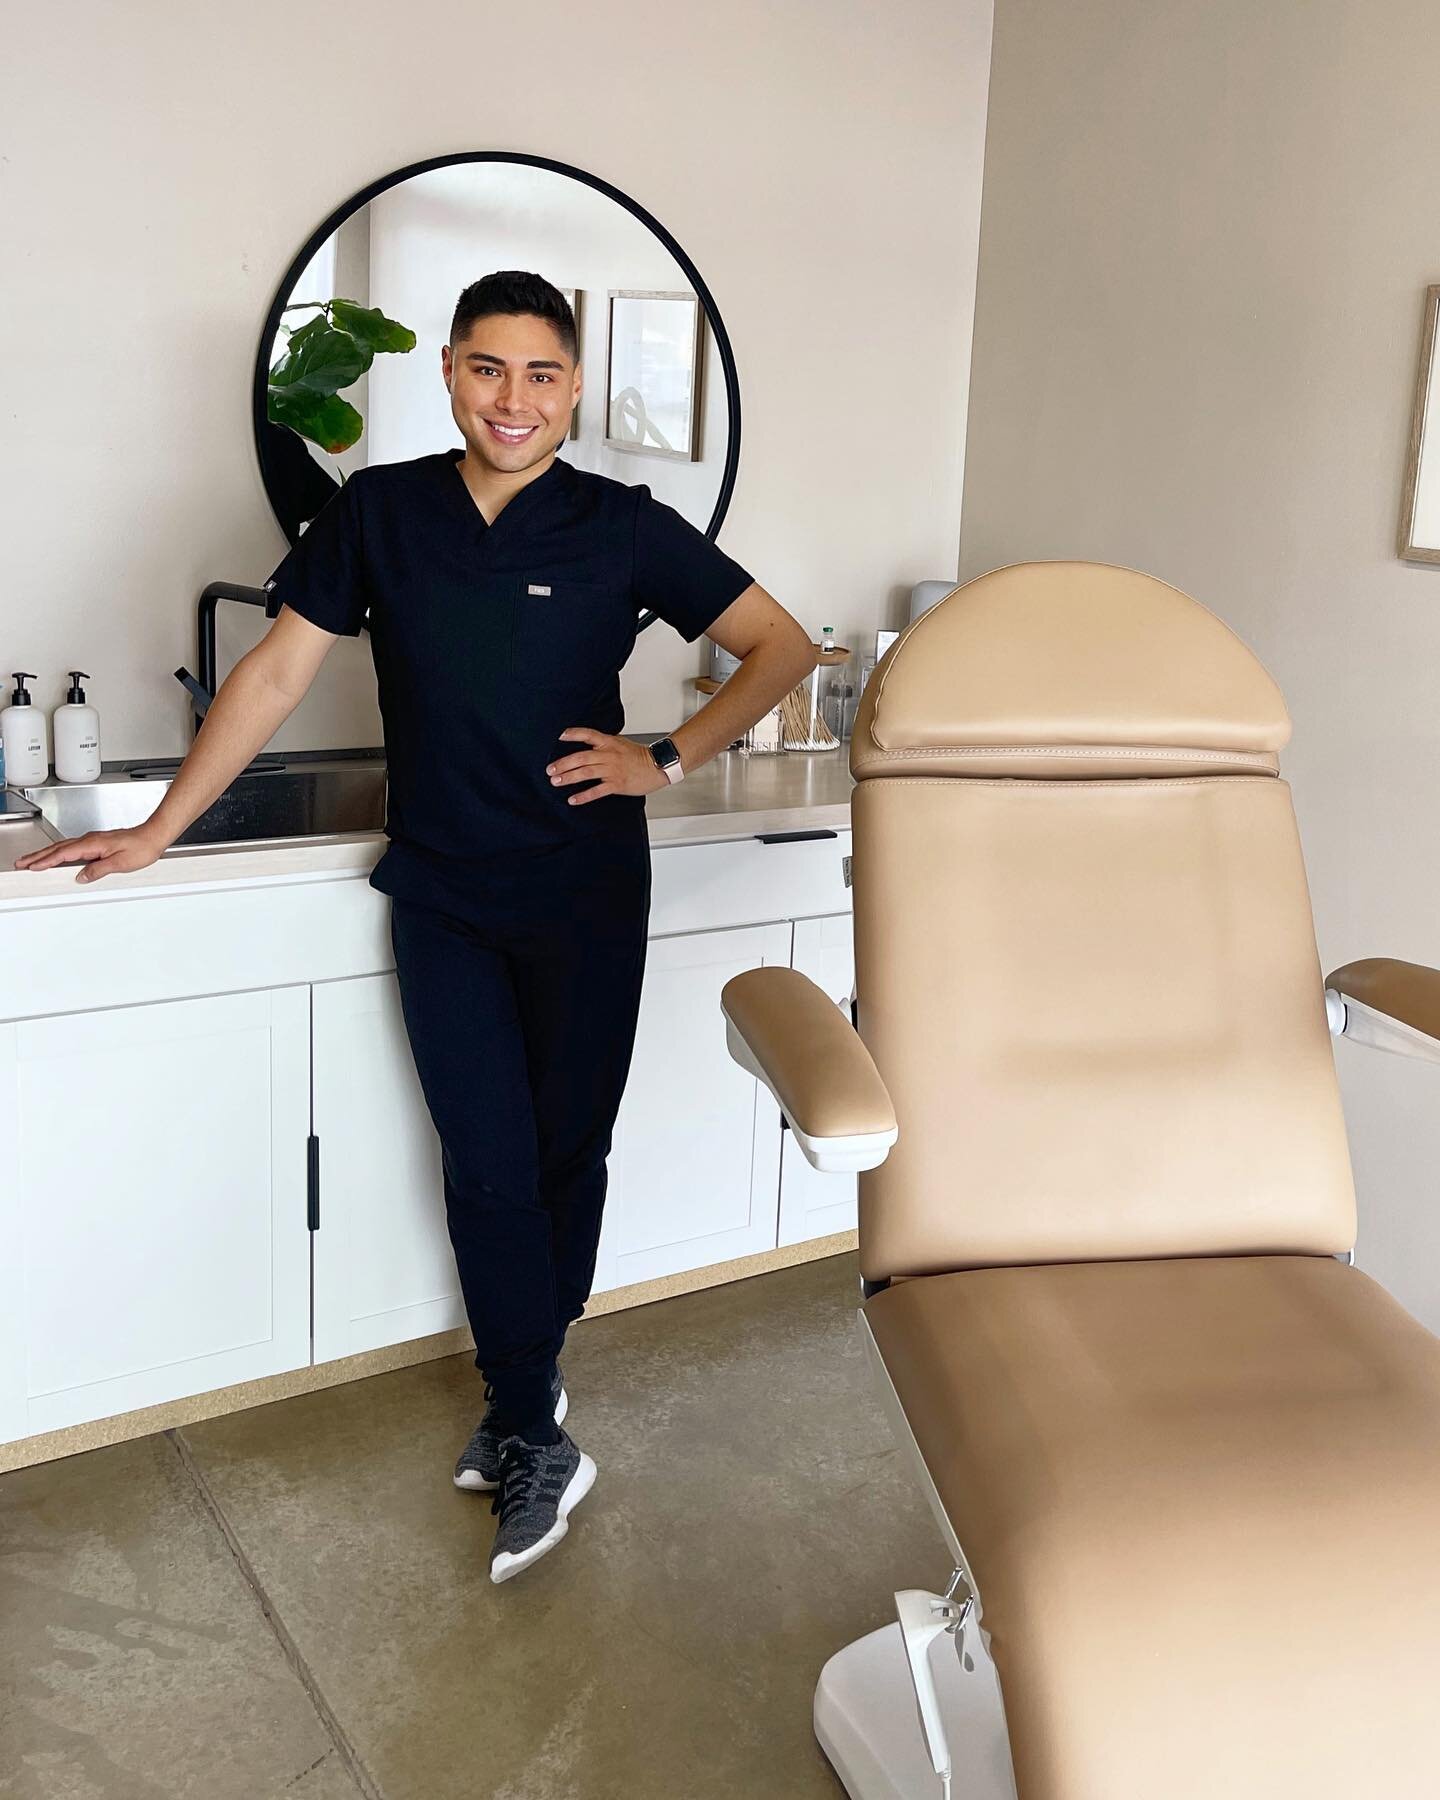 1st day injecting in the new space!  Felt sorrrrr good! Come vibe with me! ❤️ #aestheticinjector #losranchosdealbuquerque #entrepreneur #nurseinjector💉